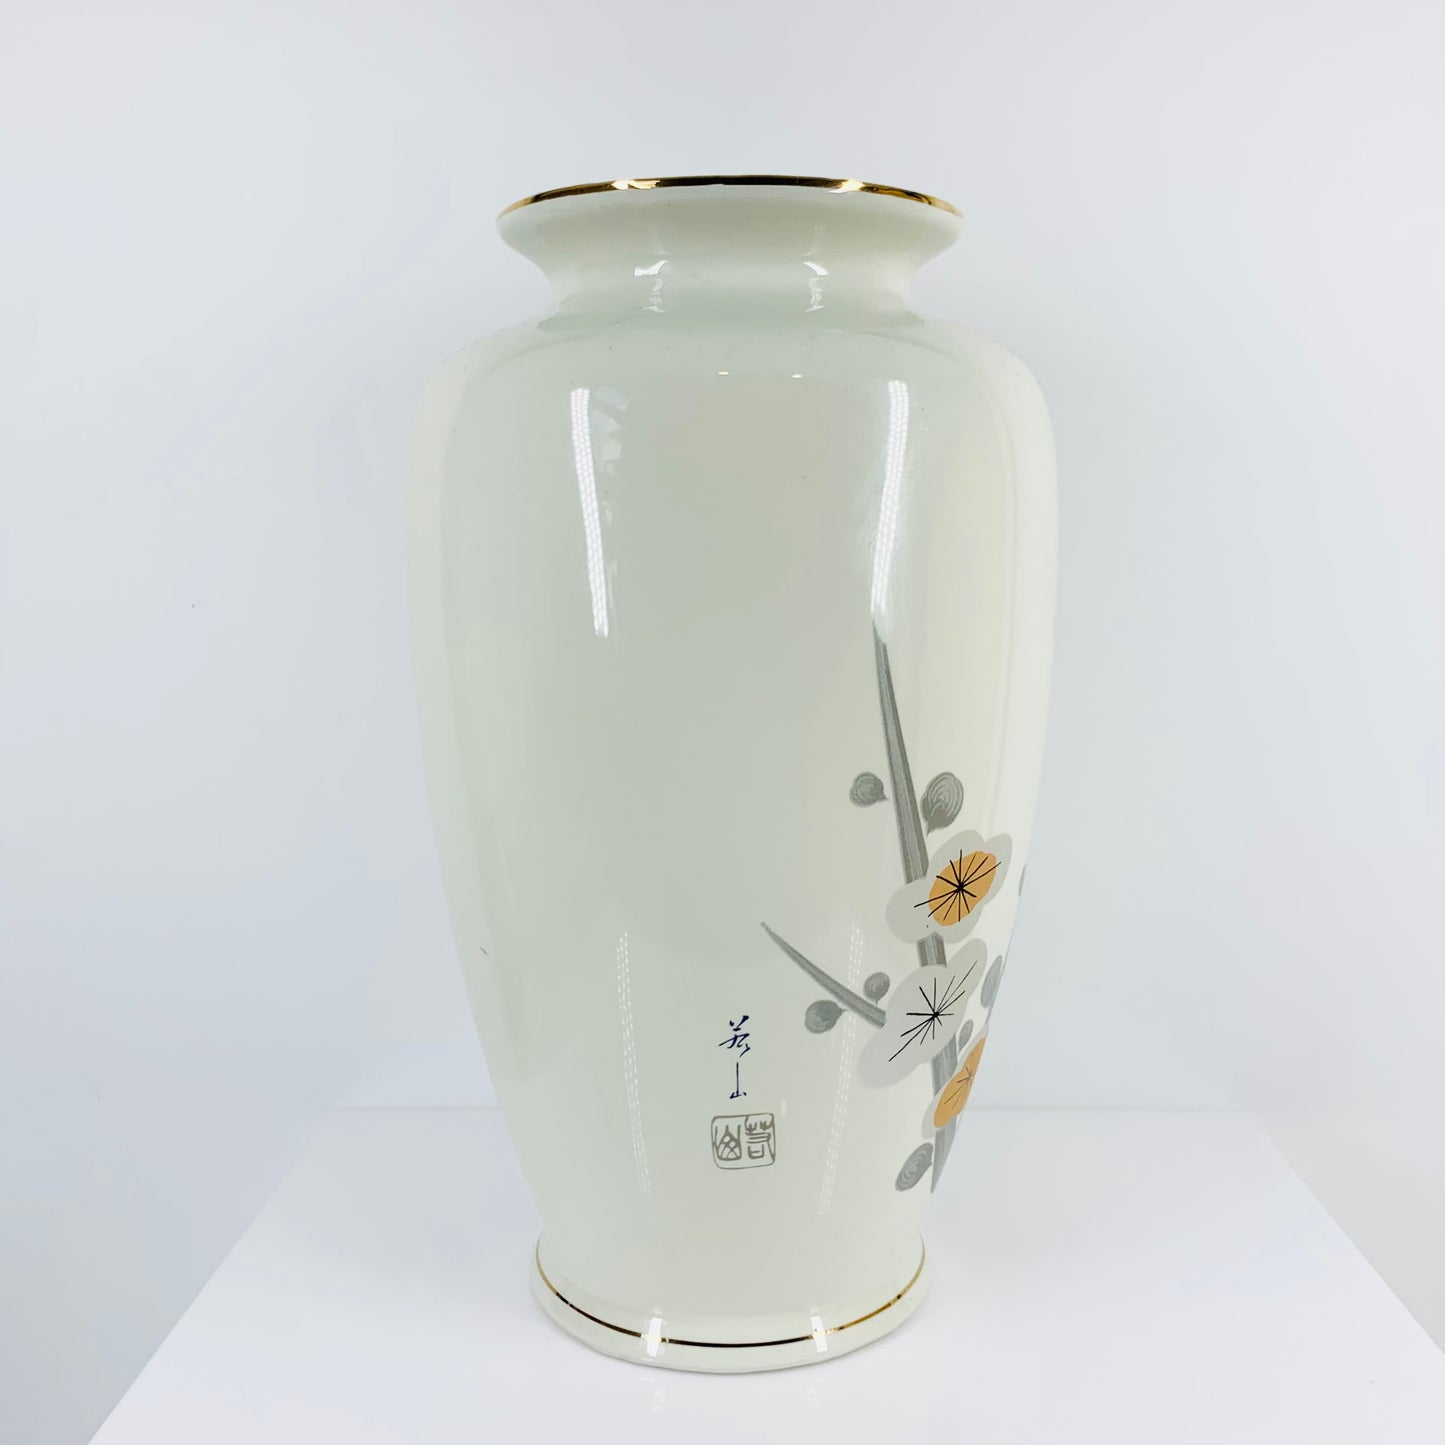 Vintage Japanese hand painted pottery vase with gold rim